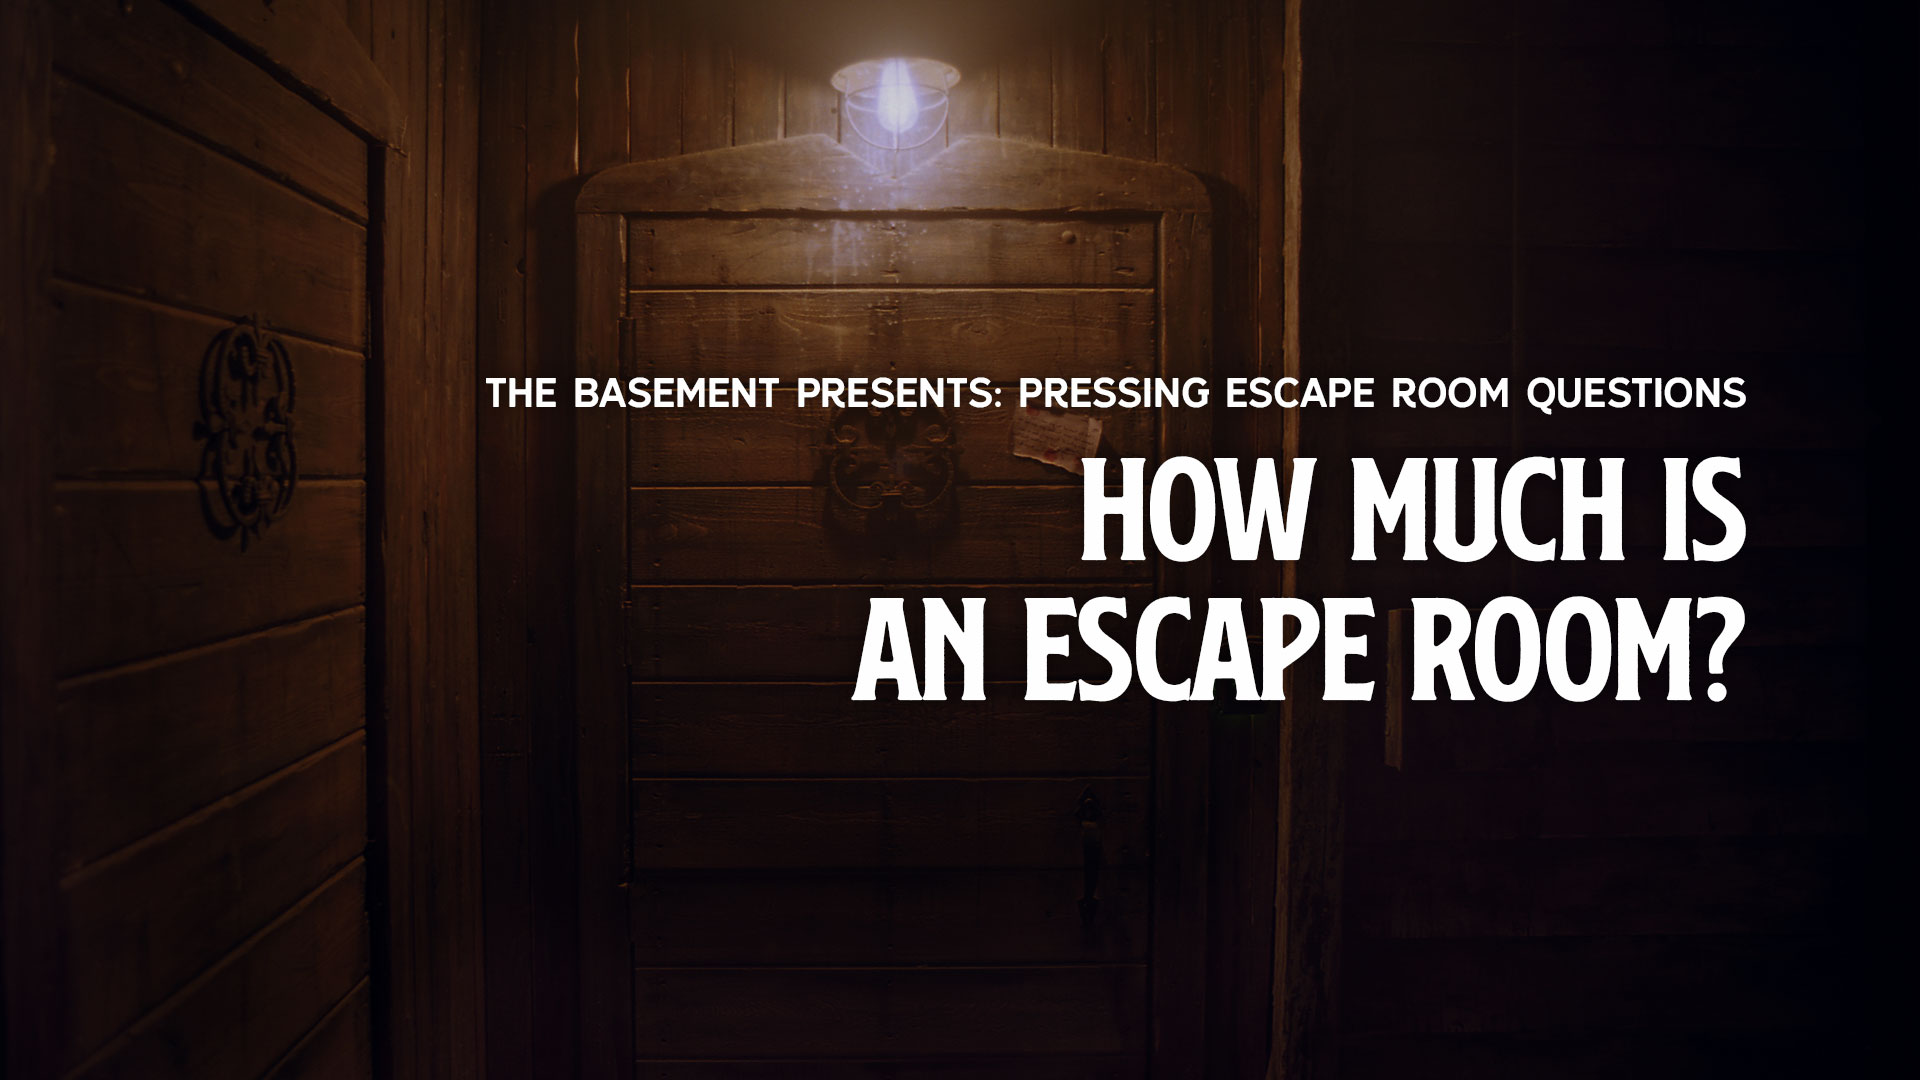 How Much Is An Escape Room?